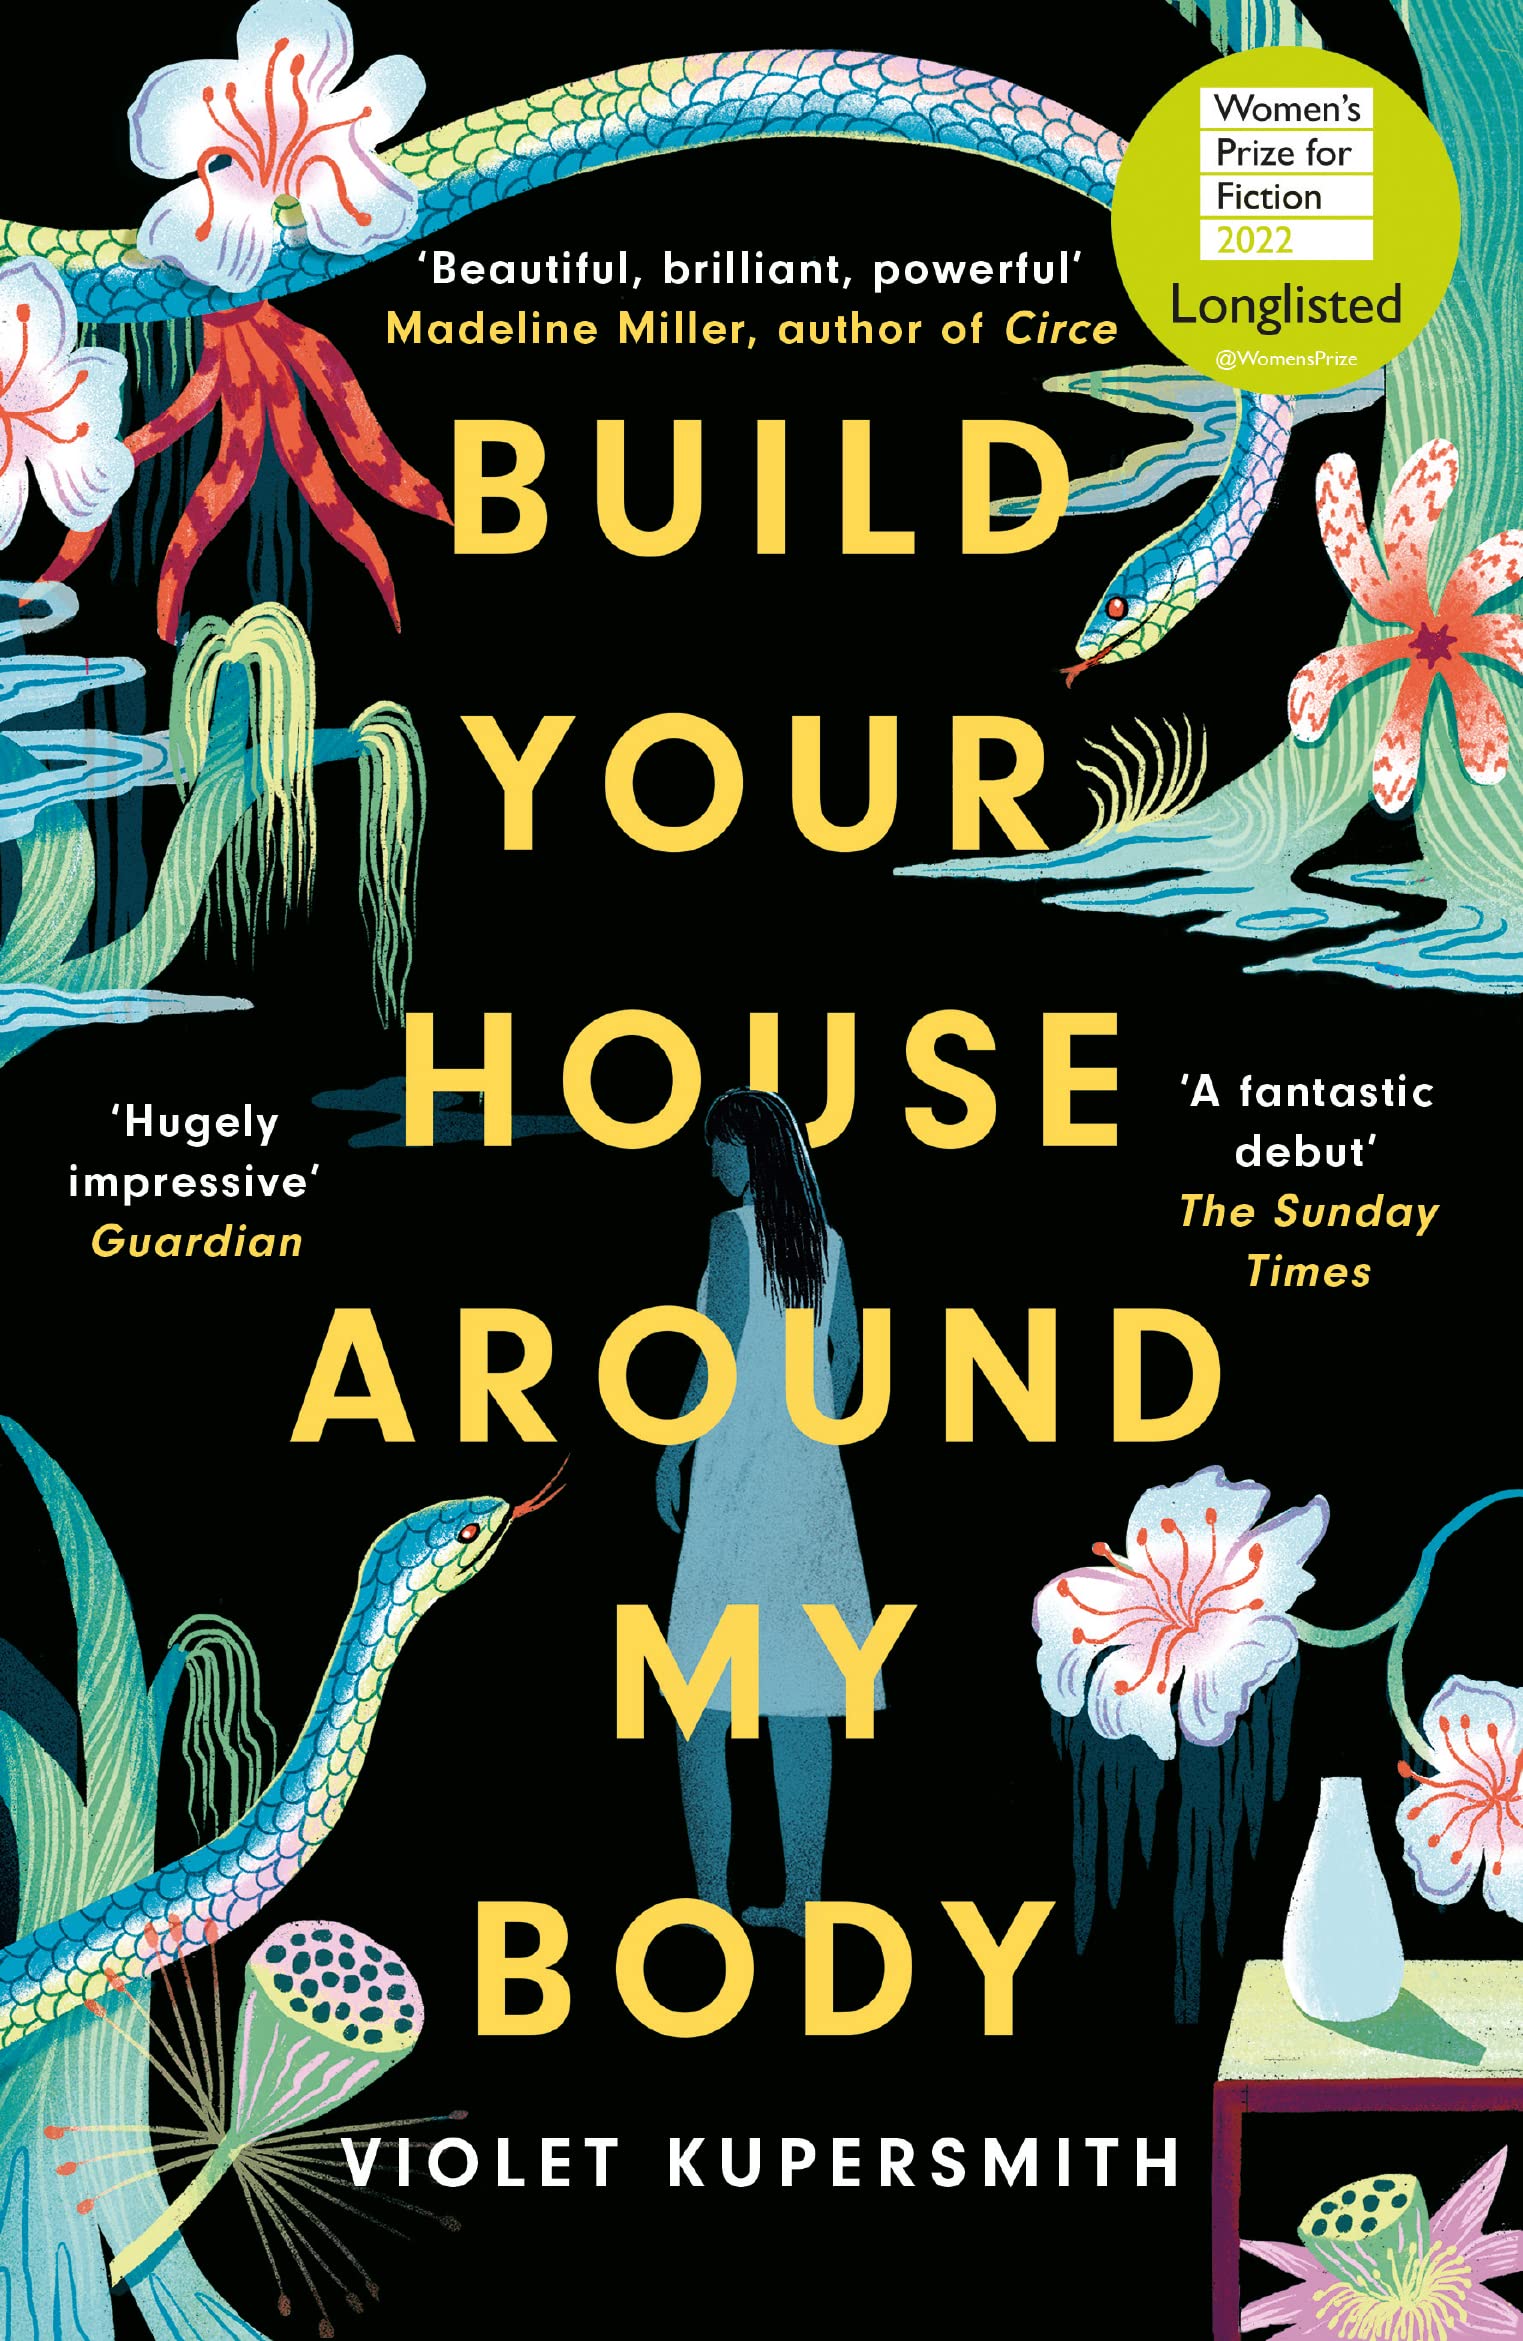 Build Your House Around My Body | Violet Kupersmith